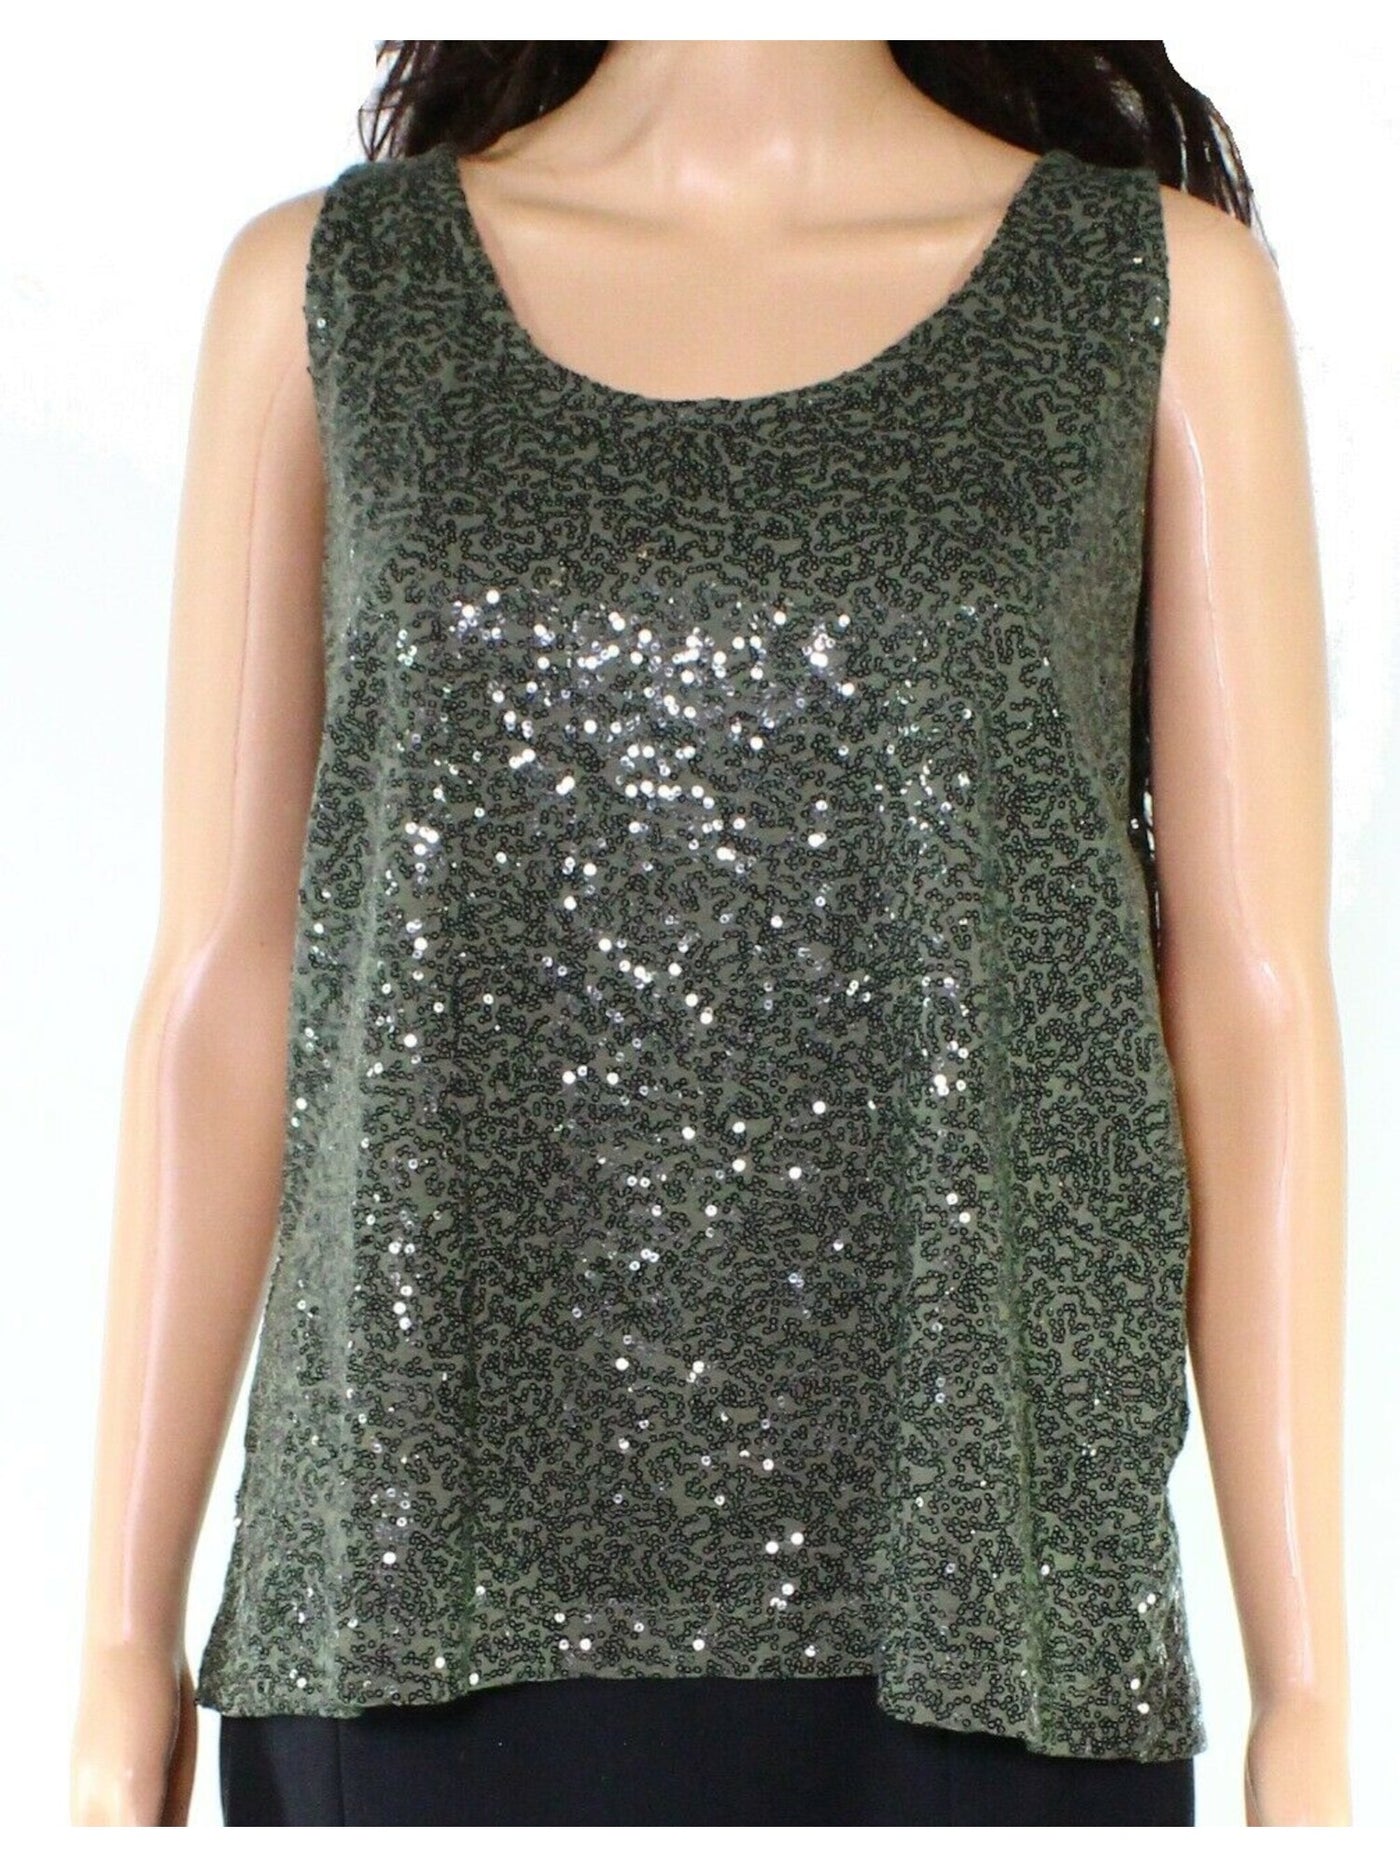 DKNY Womens Green Stretch Sequined Sleeveless Scoop Neck Evening Tank Top XS